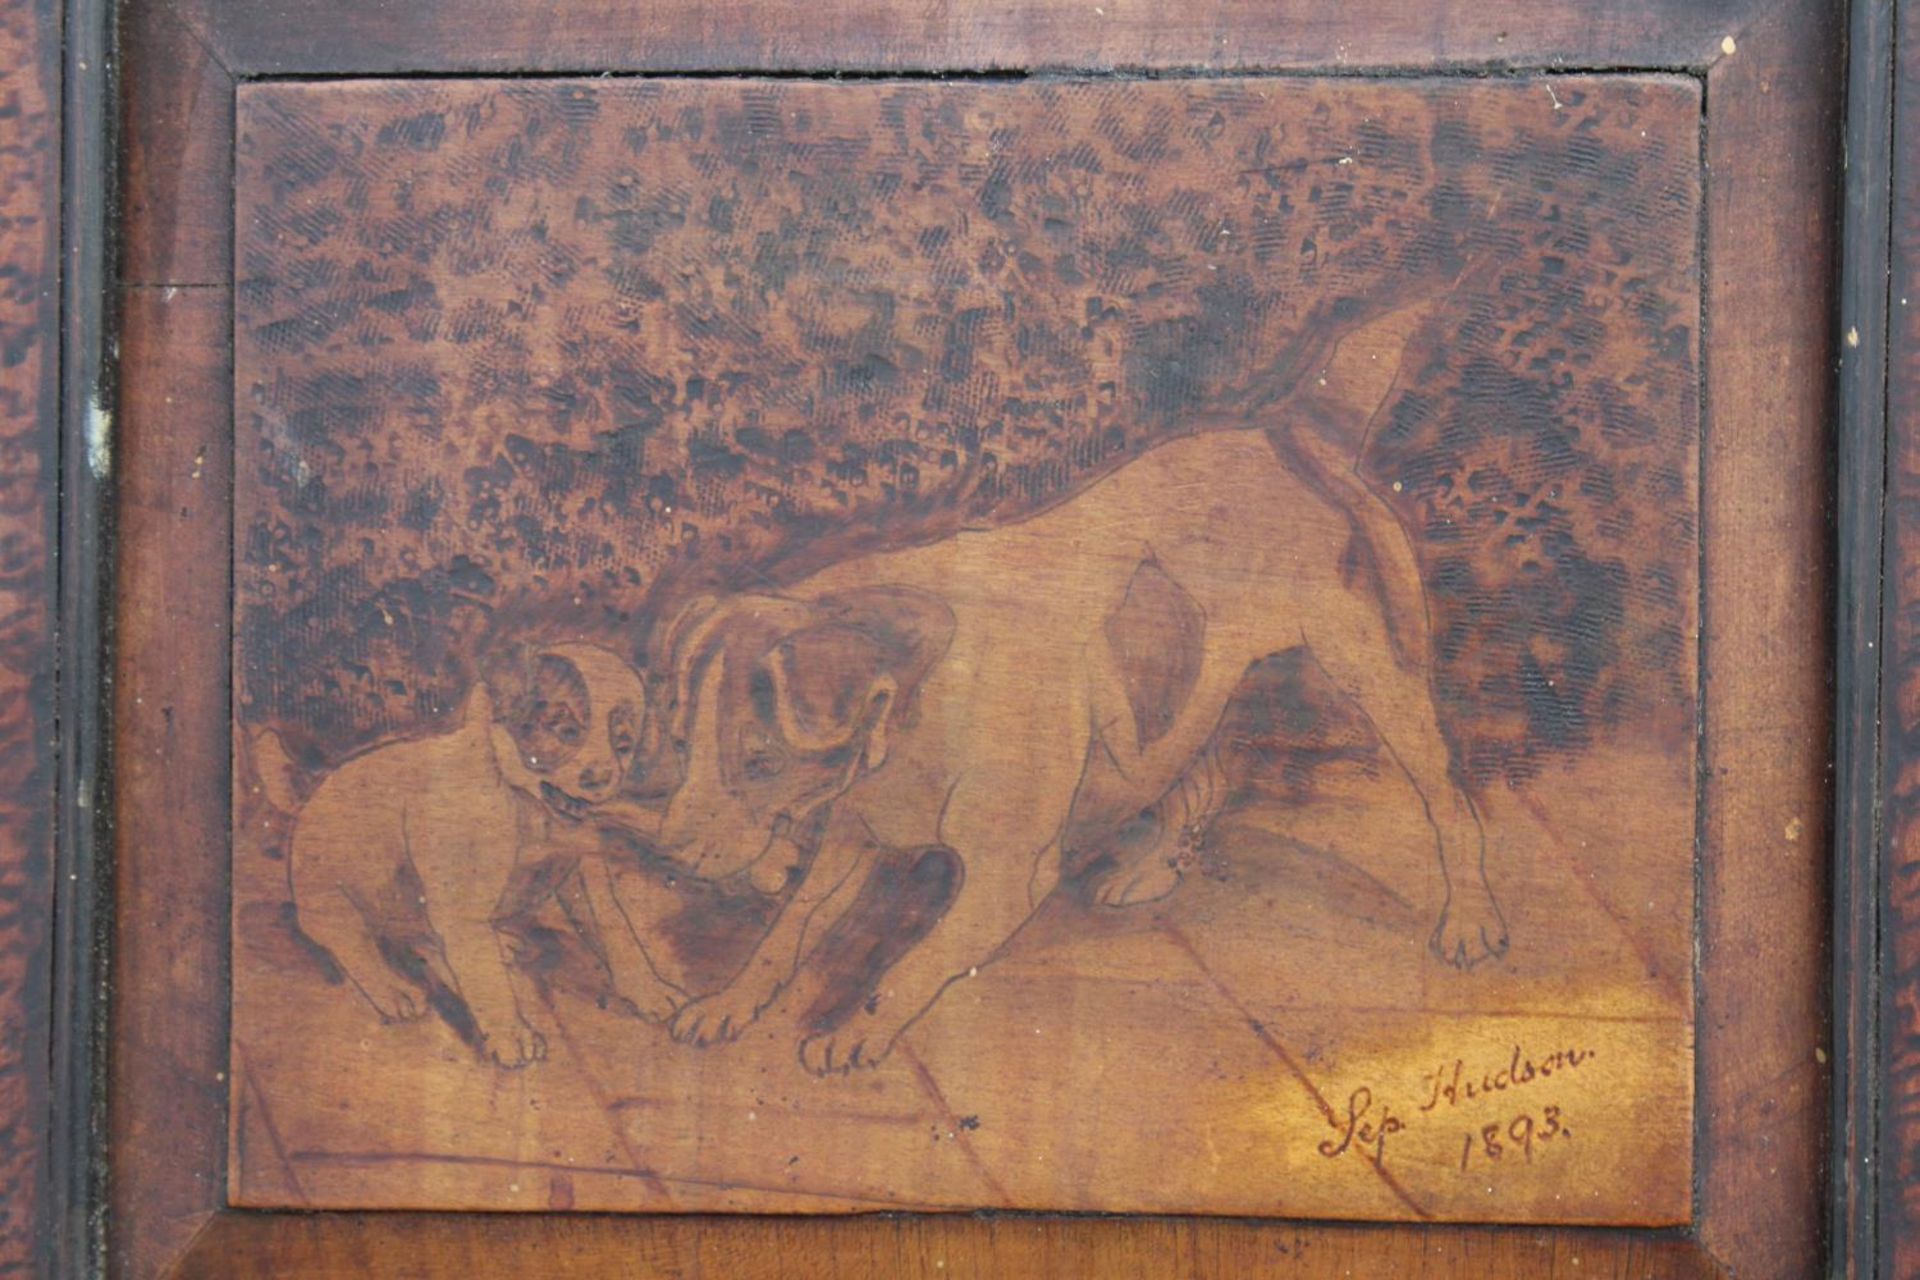 TWO VINTAGE WOODEN ETCHED BOARDS DEPICTING DOGS SIGNED AND DATED HUDSON 1893 TO THE BOTTOM RIGHT - Image 3 of 4